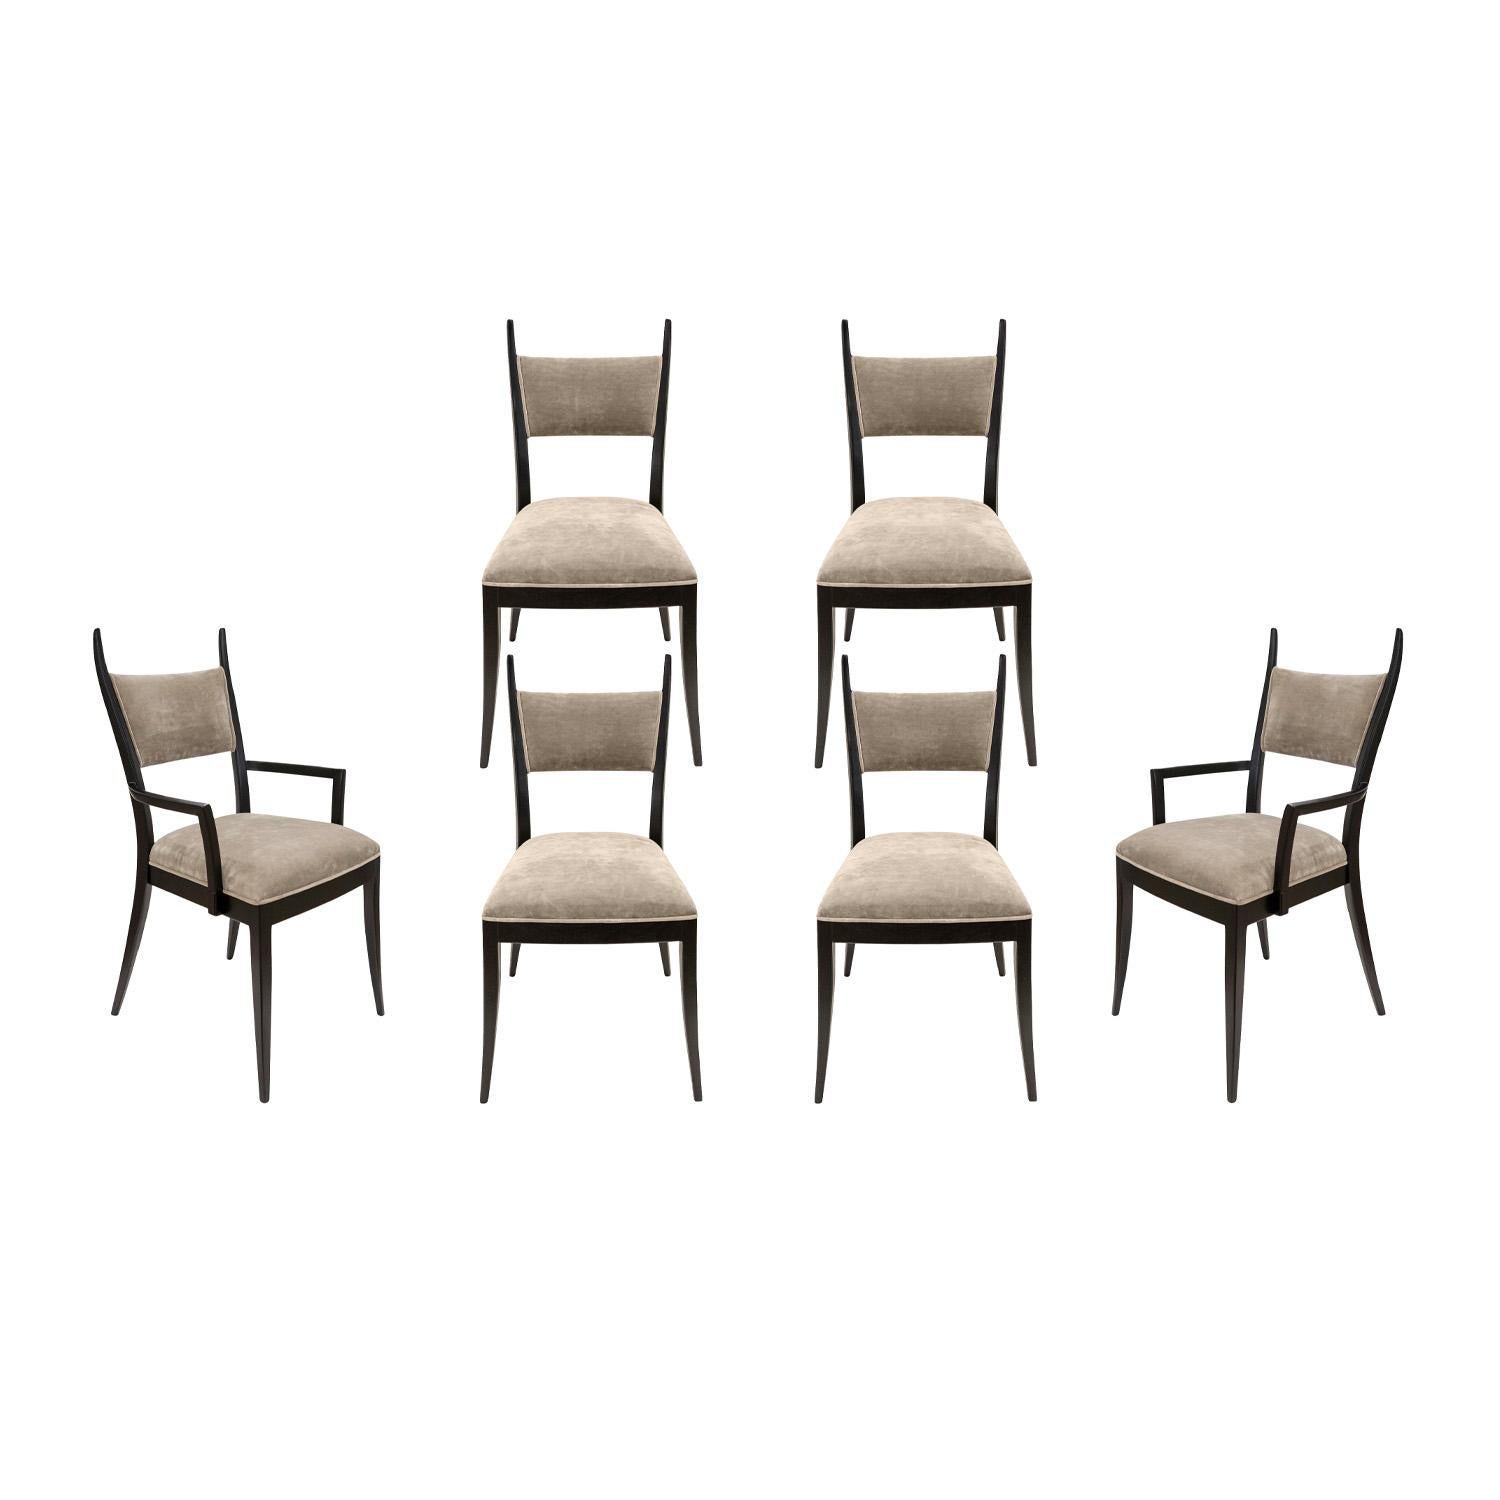 Set of 6 sculptural dining chairs, 2 arm chairs and 4 sides, models 1048 & 1048A, in ebonized mahogany with upholstered seats and back by Harvey Probber, American 1950's. This is an iconic Harvey Probber design. Refinished and reupholstered in a